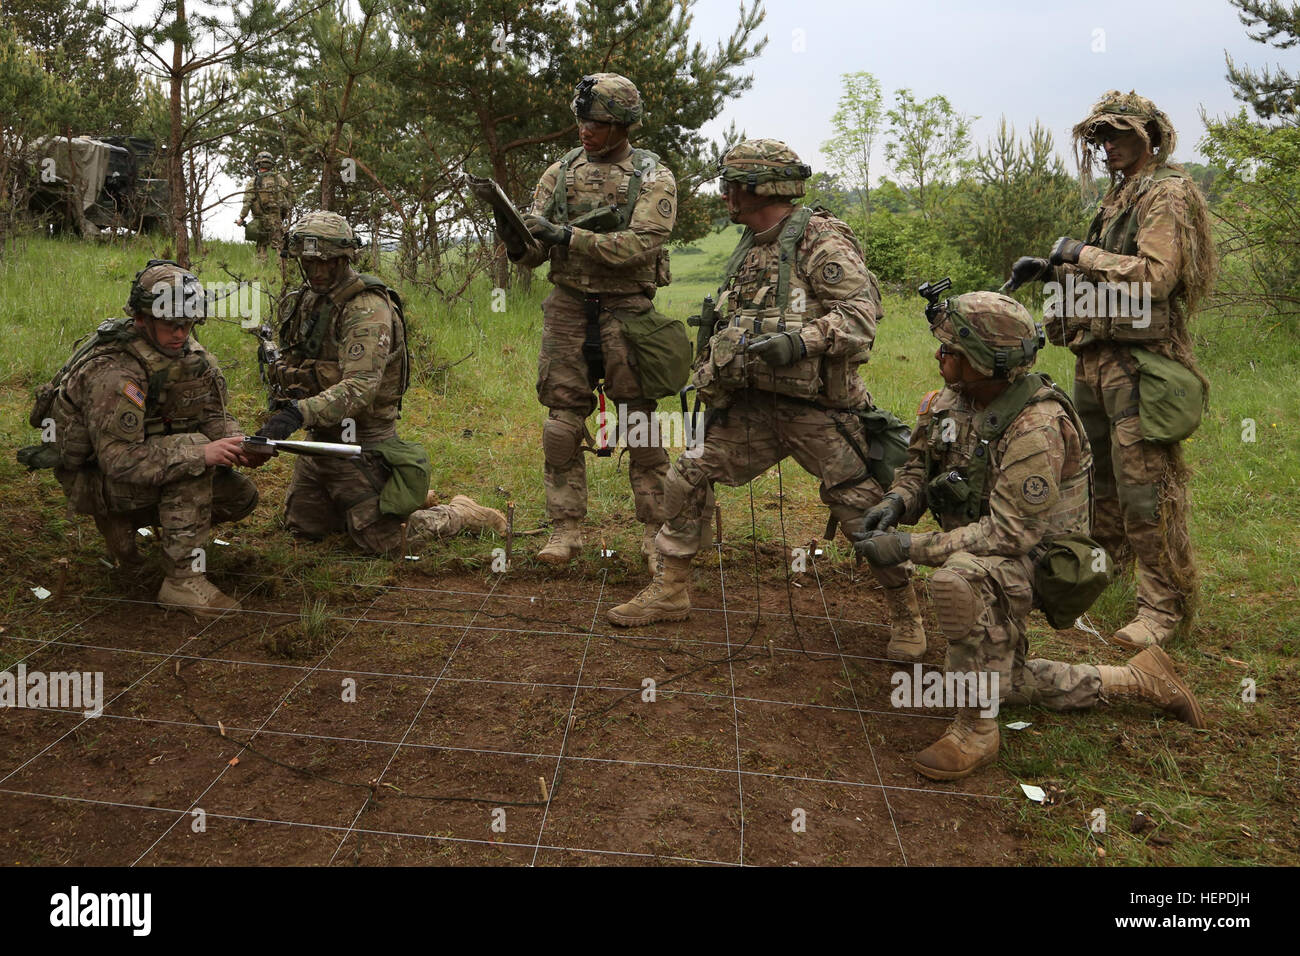 U.S. Soldiers of 3rd Squadron, 2nd Cavalry Regiment, set up a ground map for a combined arms rehearsal during exercise Combined Resolve IV at the U.S. Army’s Joint Multinational Readiness Center in Hohenfels, Germany, May 24, 2015.  Combined Resolve IV is an Army Europe directed exercise training a multinational brigade and enhancing interoperability with allies and partner nations. Combined Resolve trains on unified land operations against a complex threat while improving the combat readiness of all participants. The Combined Resolve series of exercises incorporates the U.S. Army’s Regionally Stock Photo